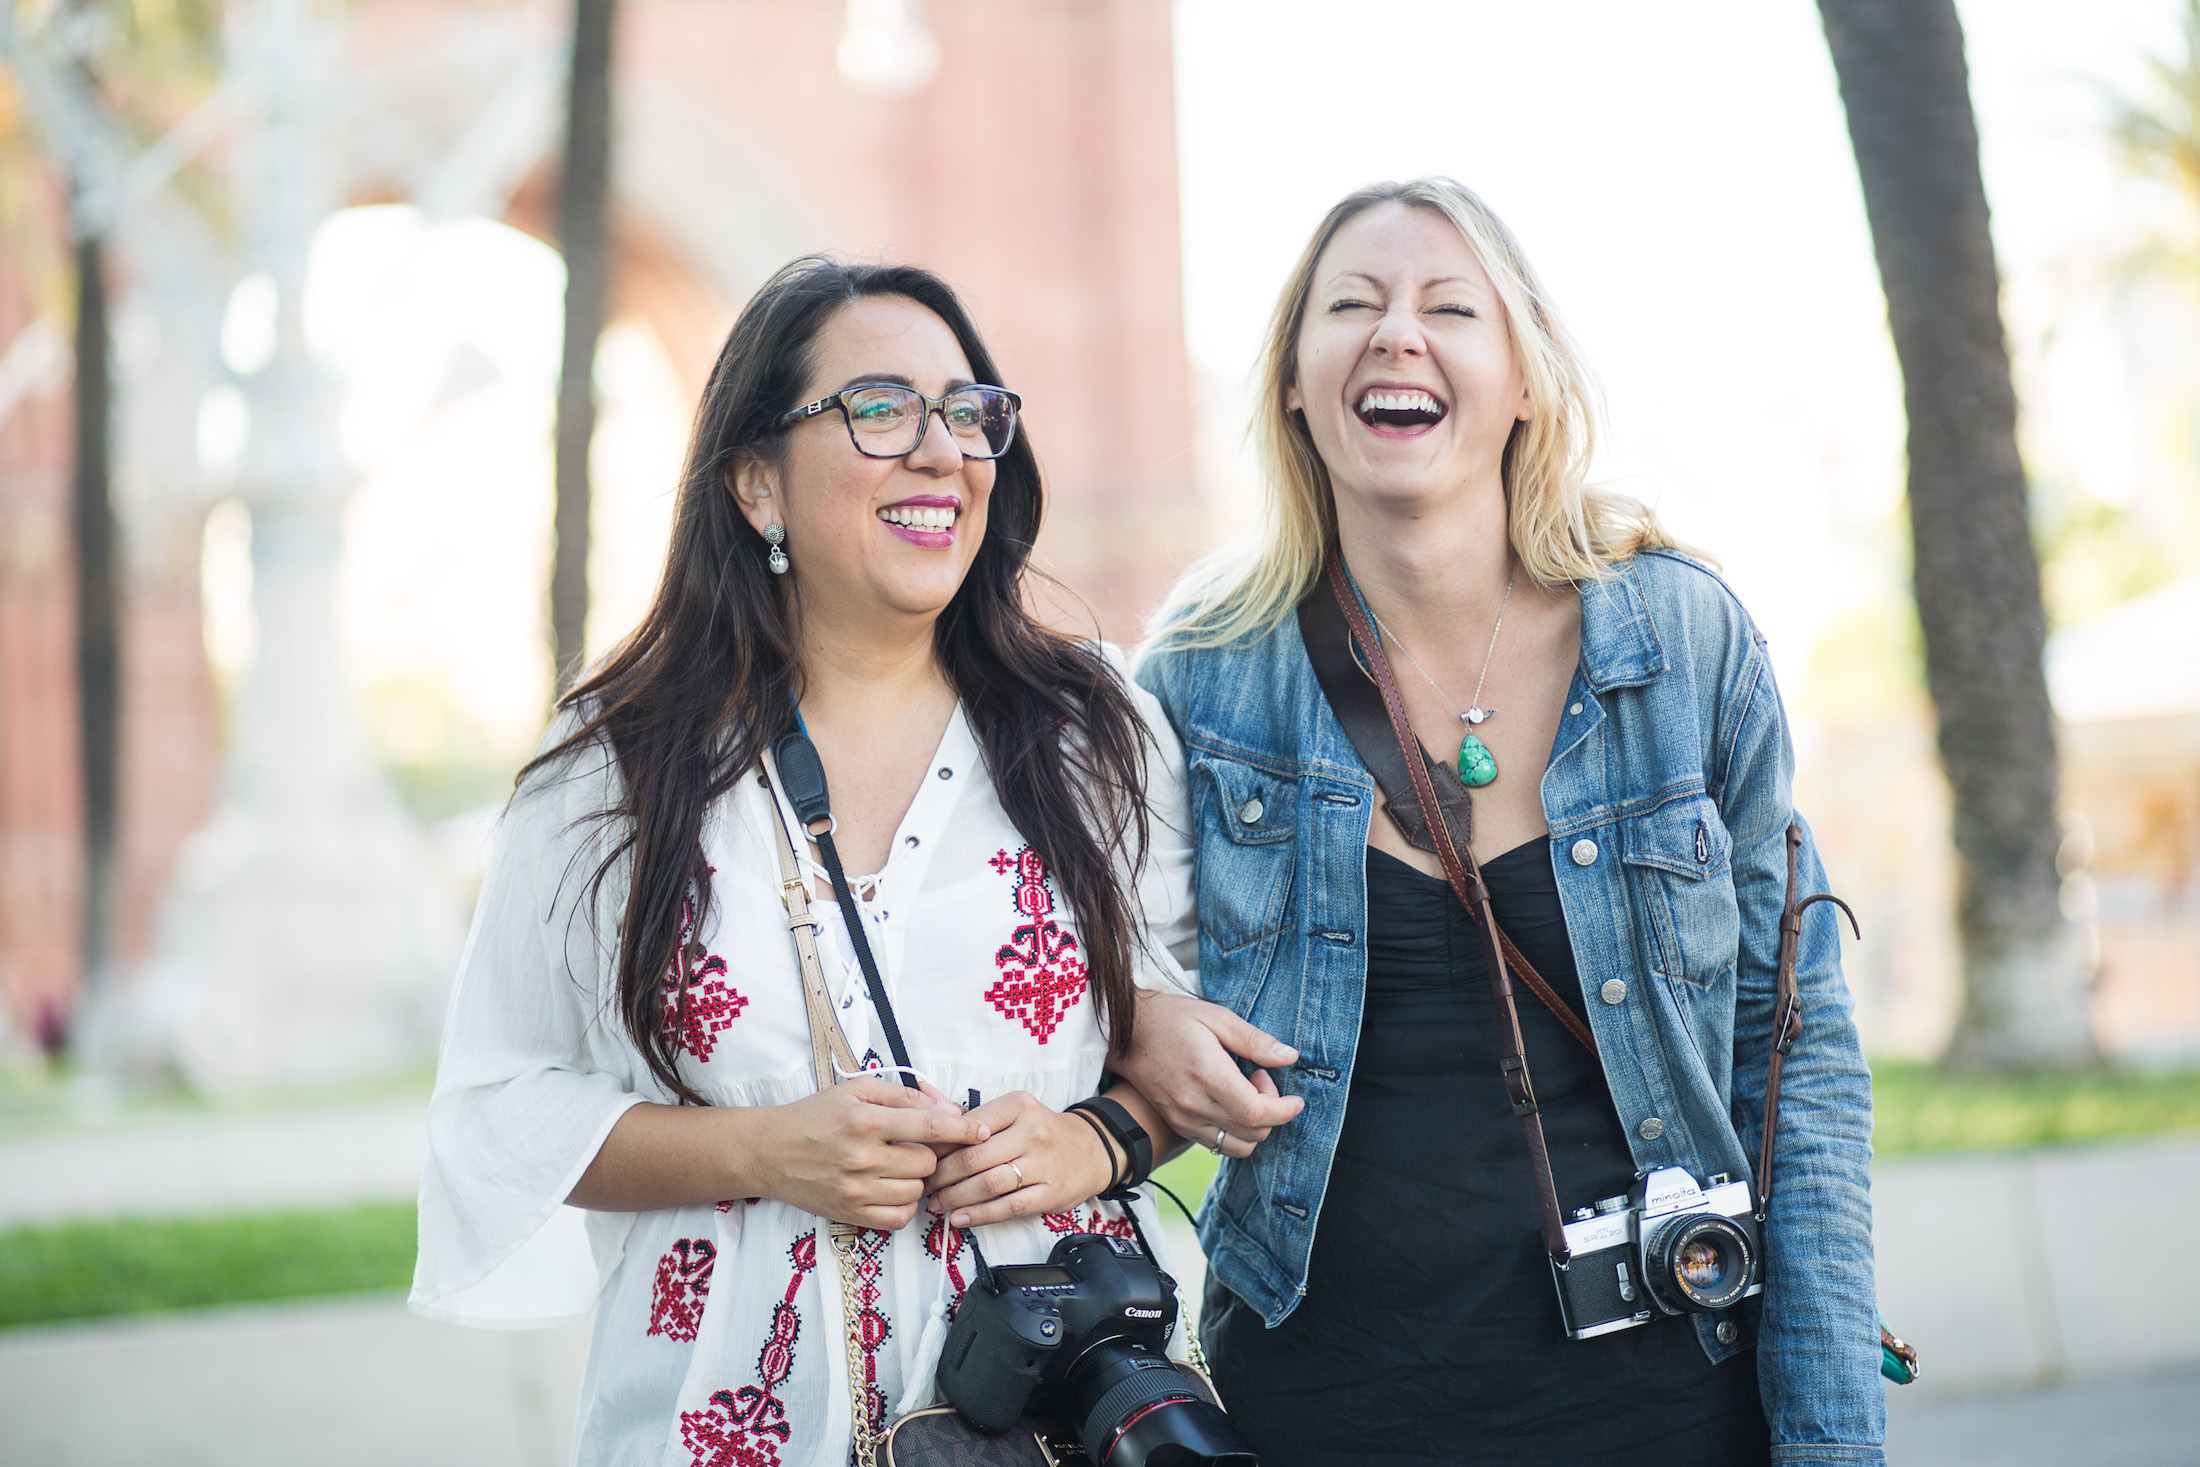  Marian from Lake Como & Erin from Maui enjoying a laugh. Flytographer:  Johnny  